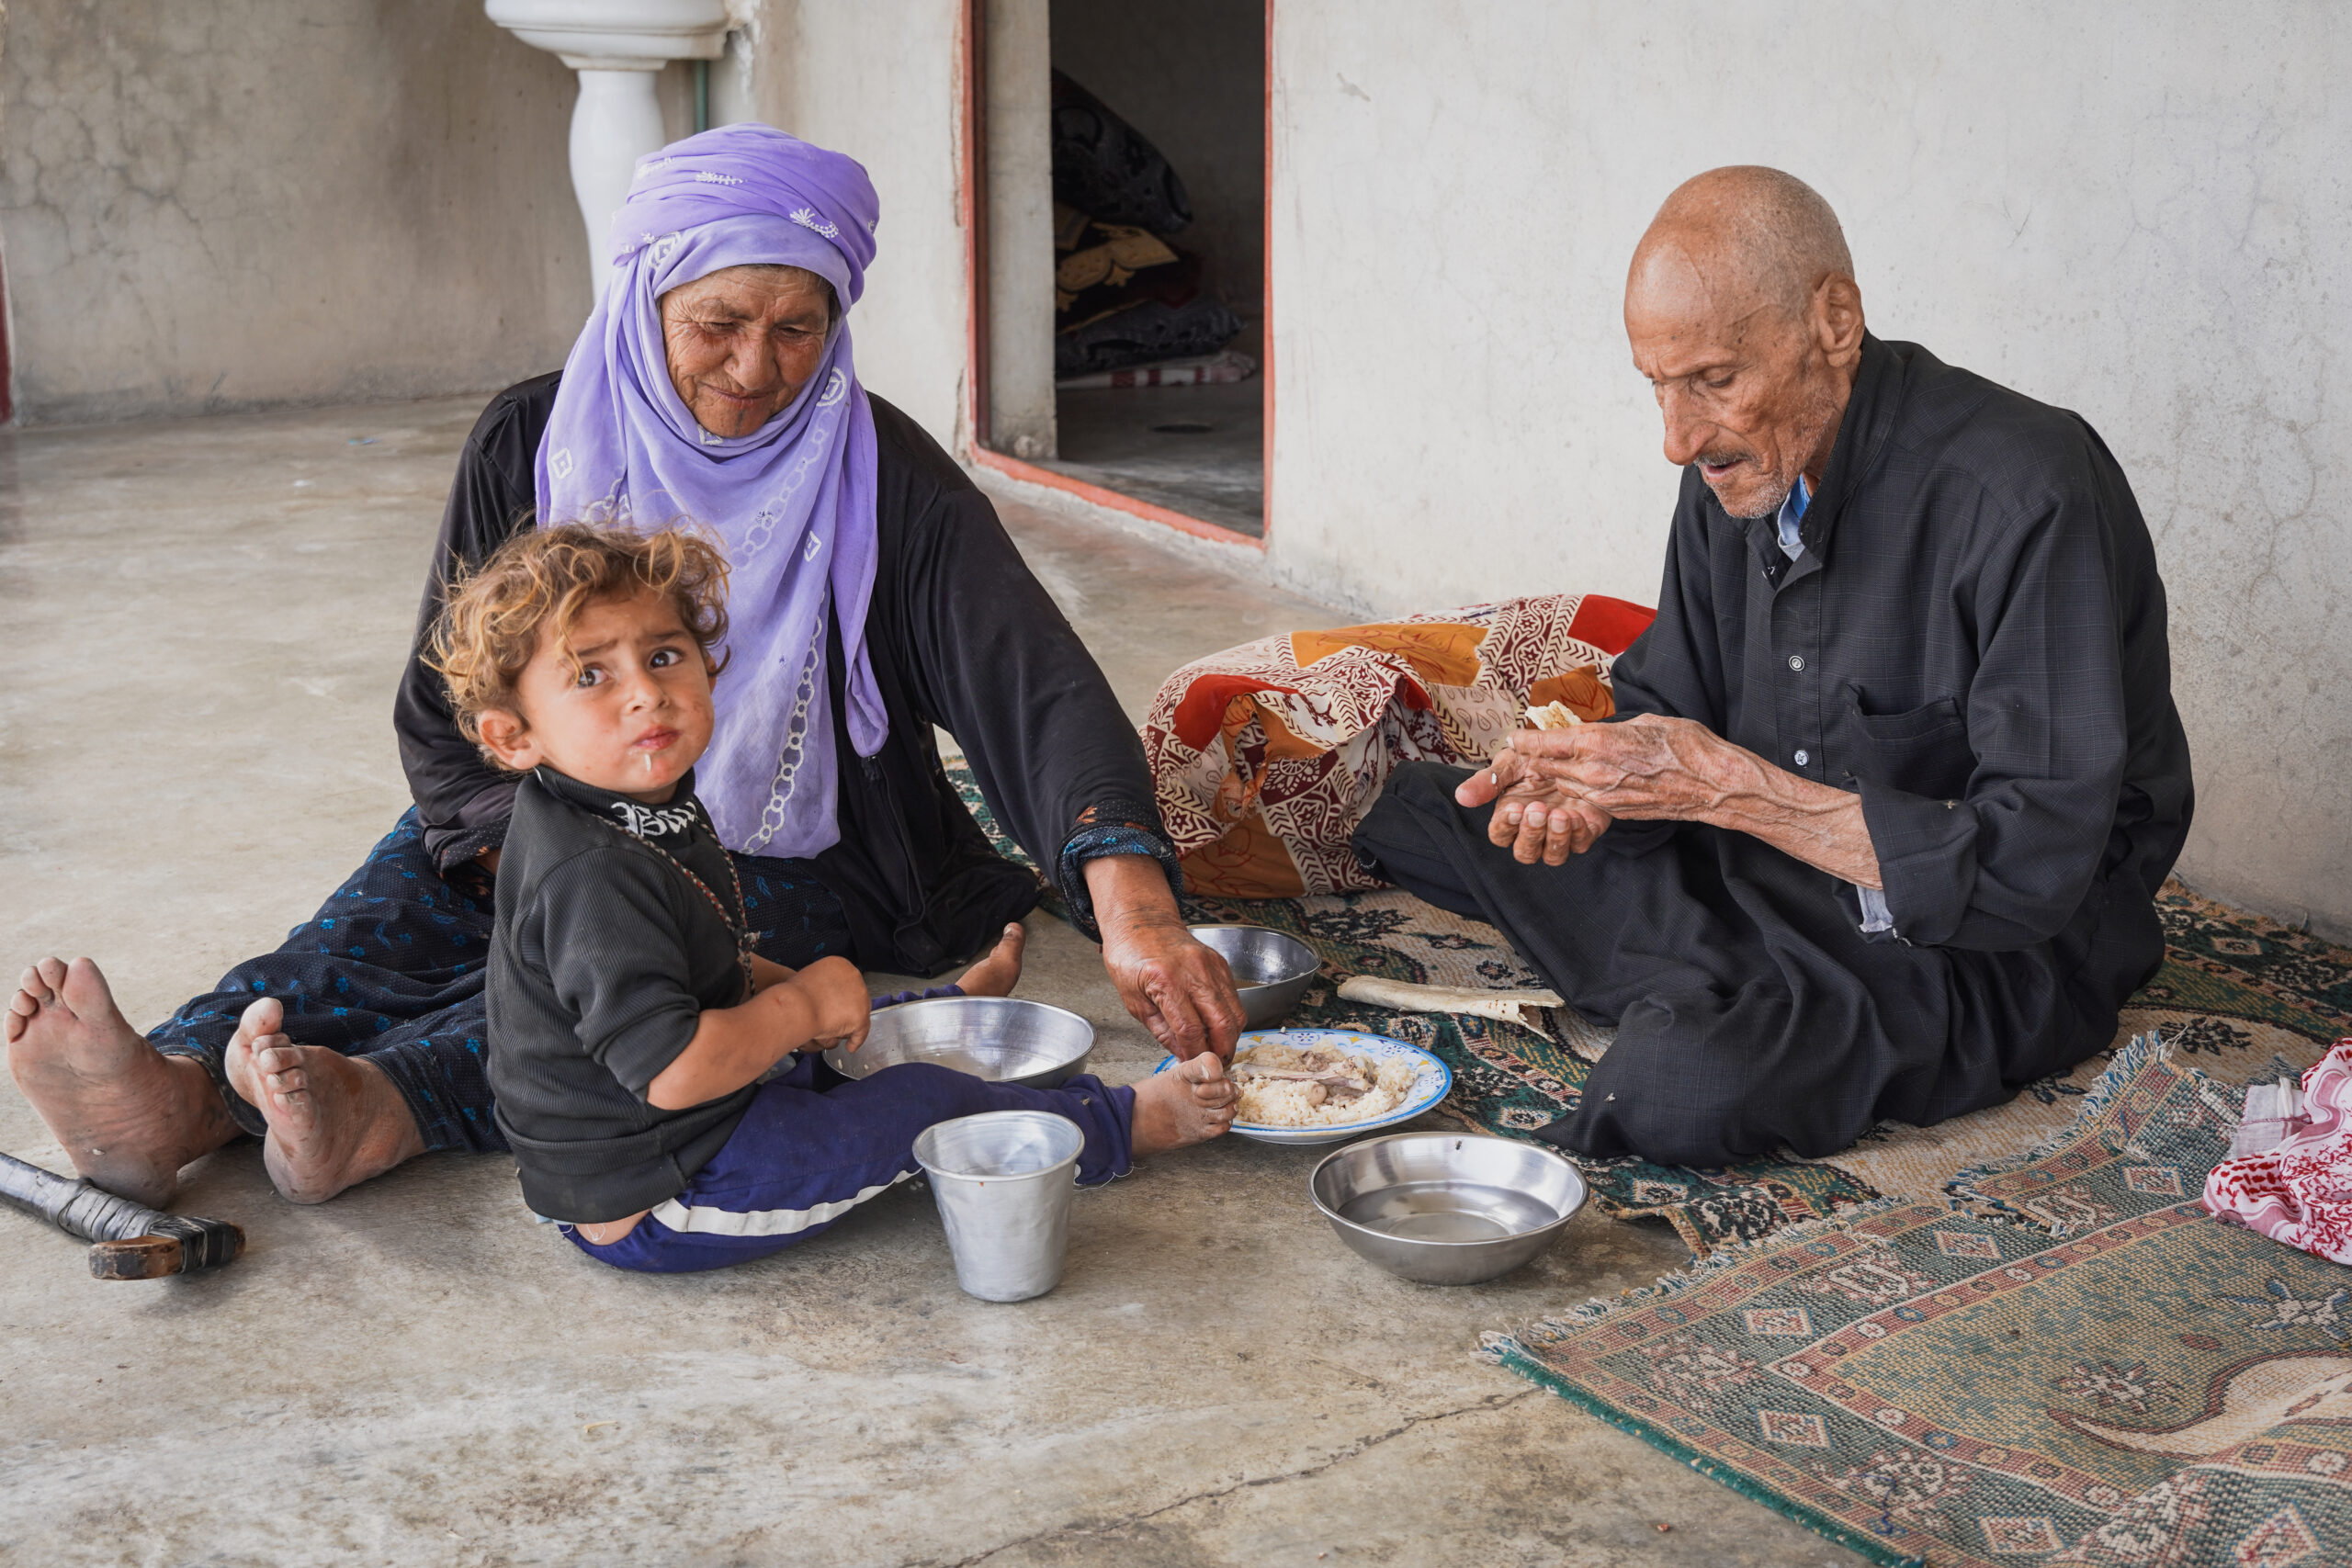 “Nutritious Food Has Been a Lifesaver”: Supplementary Food Vouchers for Families in Northeast Syria